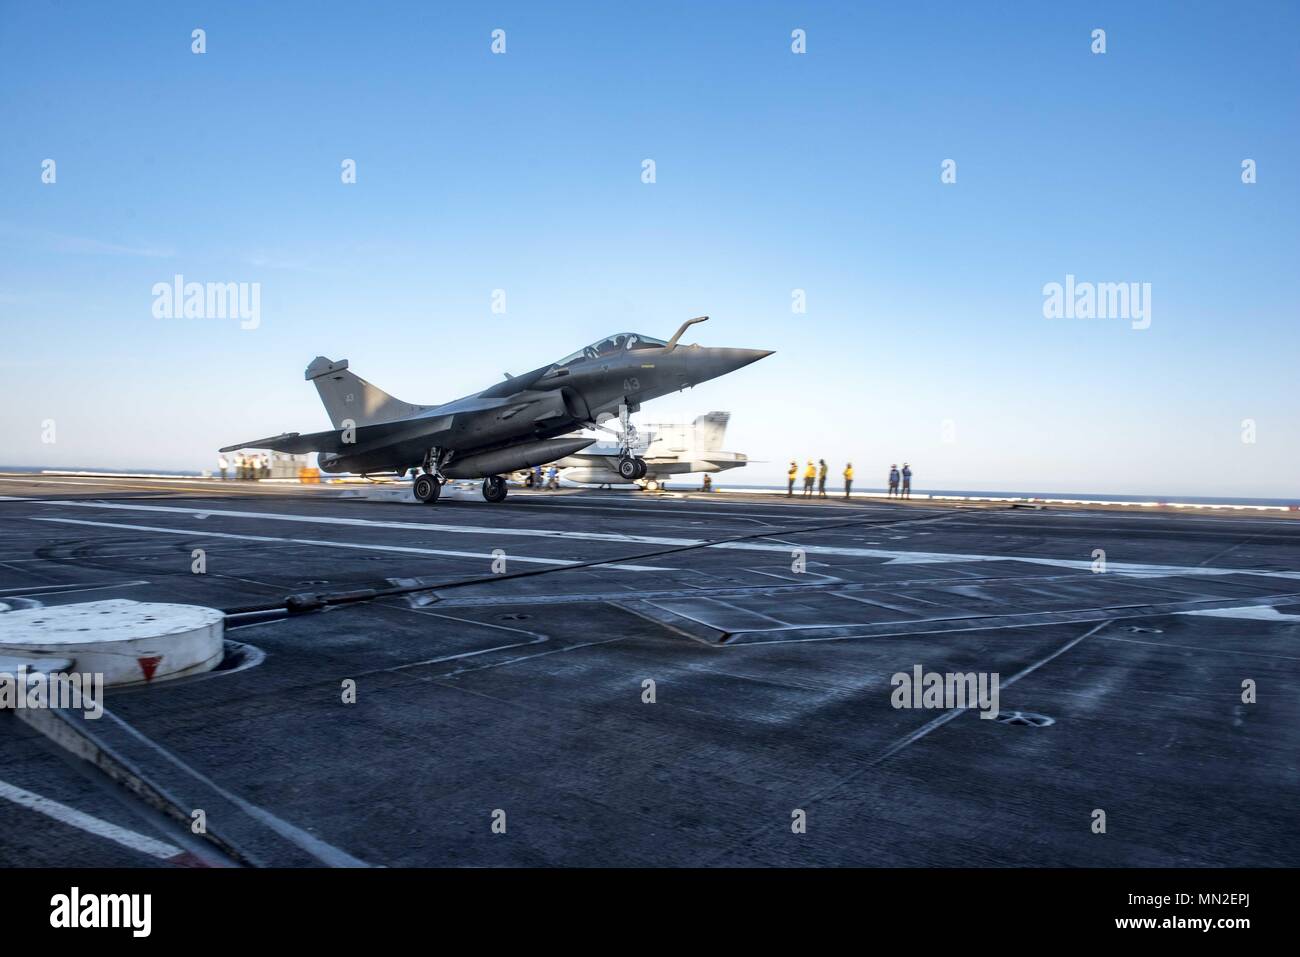 180510-N-UV609-0540 ATLANTIC OCEAN (May 10, 2018) A Rafale Marine attached to squadron 17F of the French navy lands on the flight deck of the aircraft carrier USS George H.W. Bush (CVN 77), May 10, 2018. GHWB is underway in the Atlantic Ocean conducting carrier air wing exercises with the French navy to strengthen partnerships and deepen interoperability between the two nations' naval forces. (U.S. Navy photo by Mass Communication Specialist 2nd Class David Mora Jr.). () Stock Photo